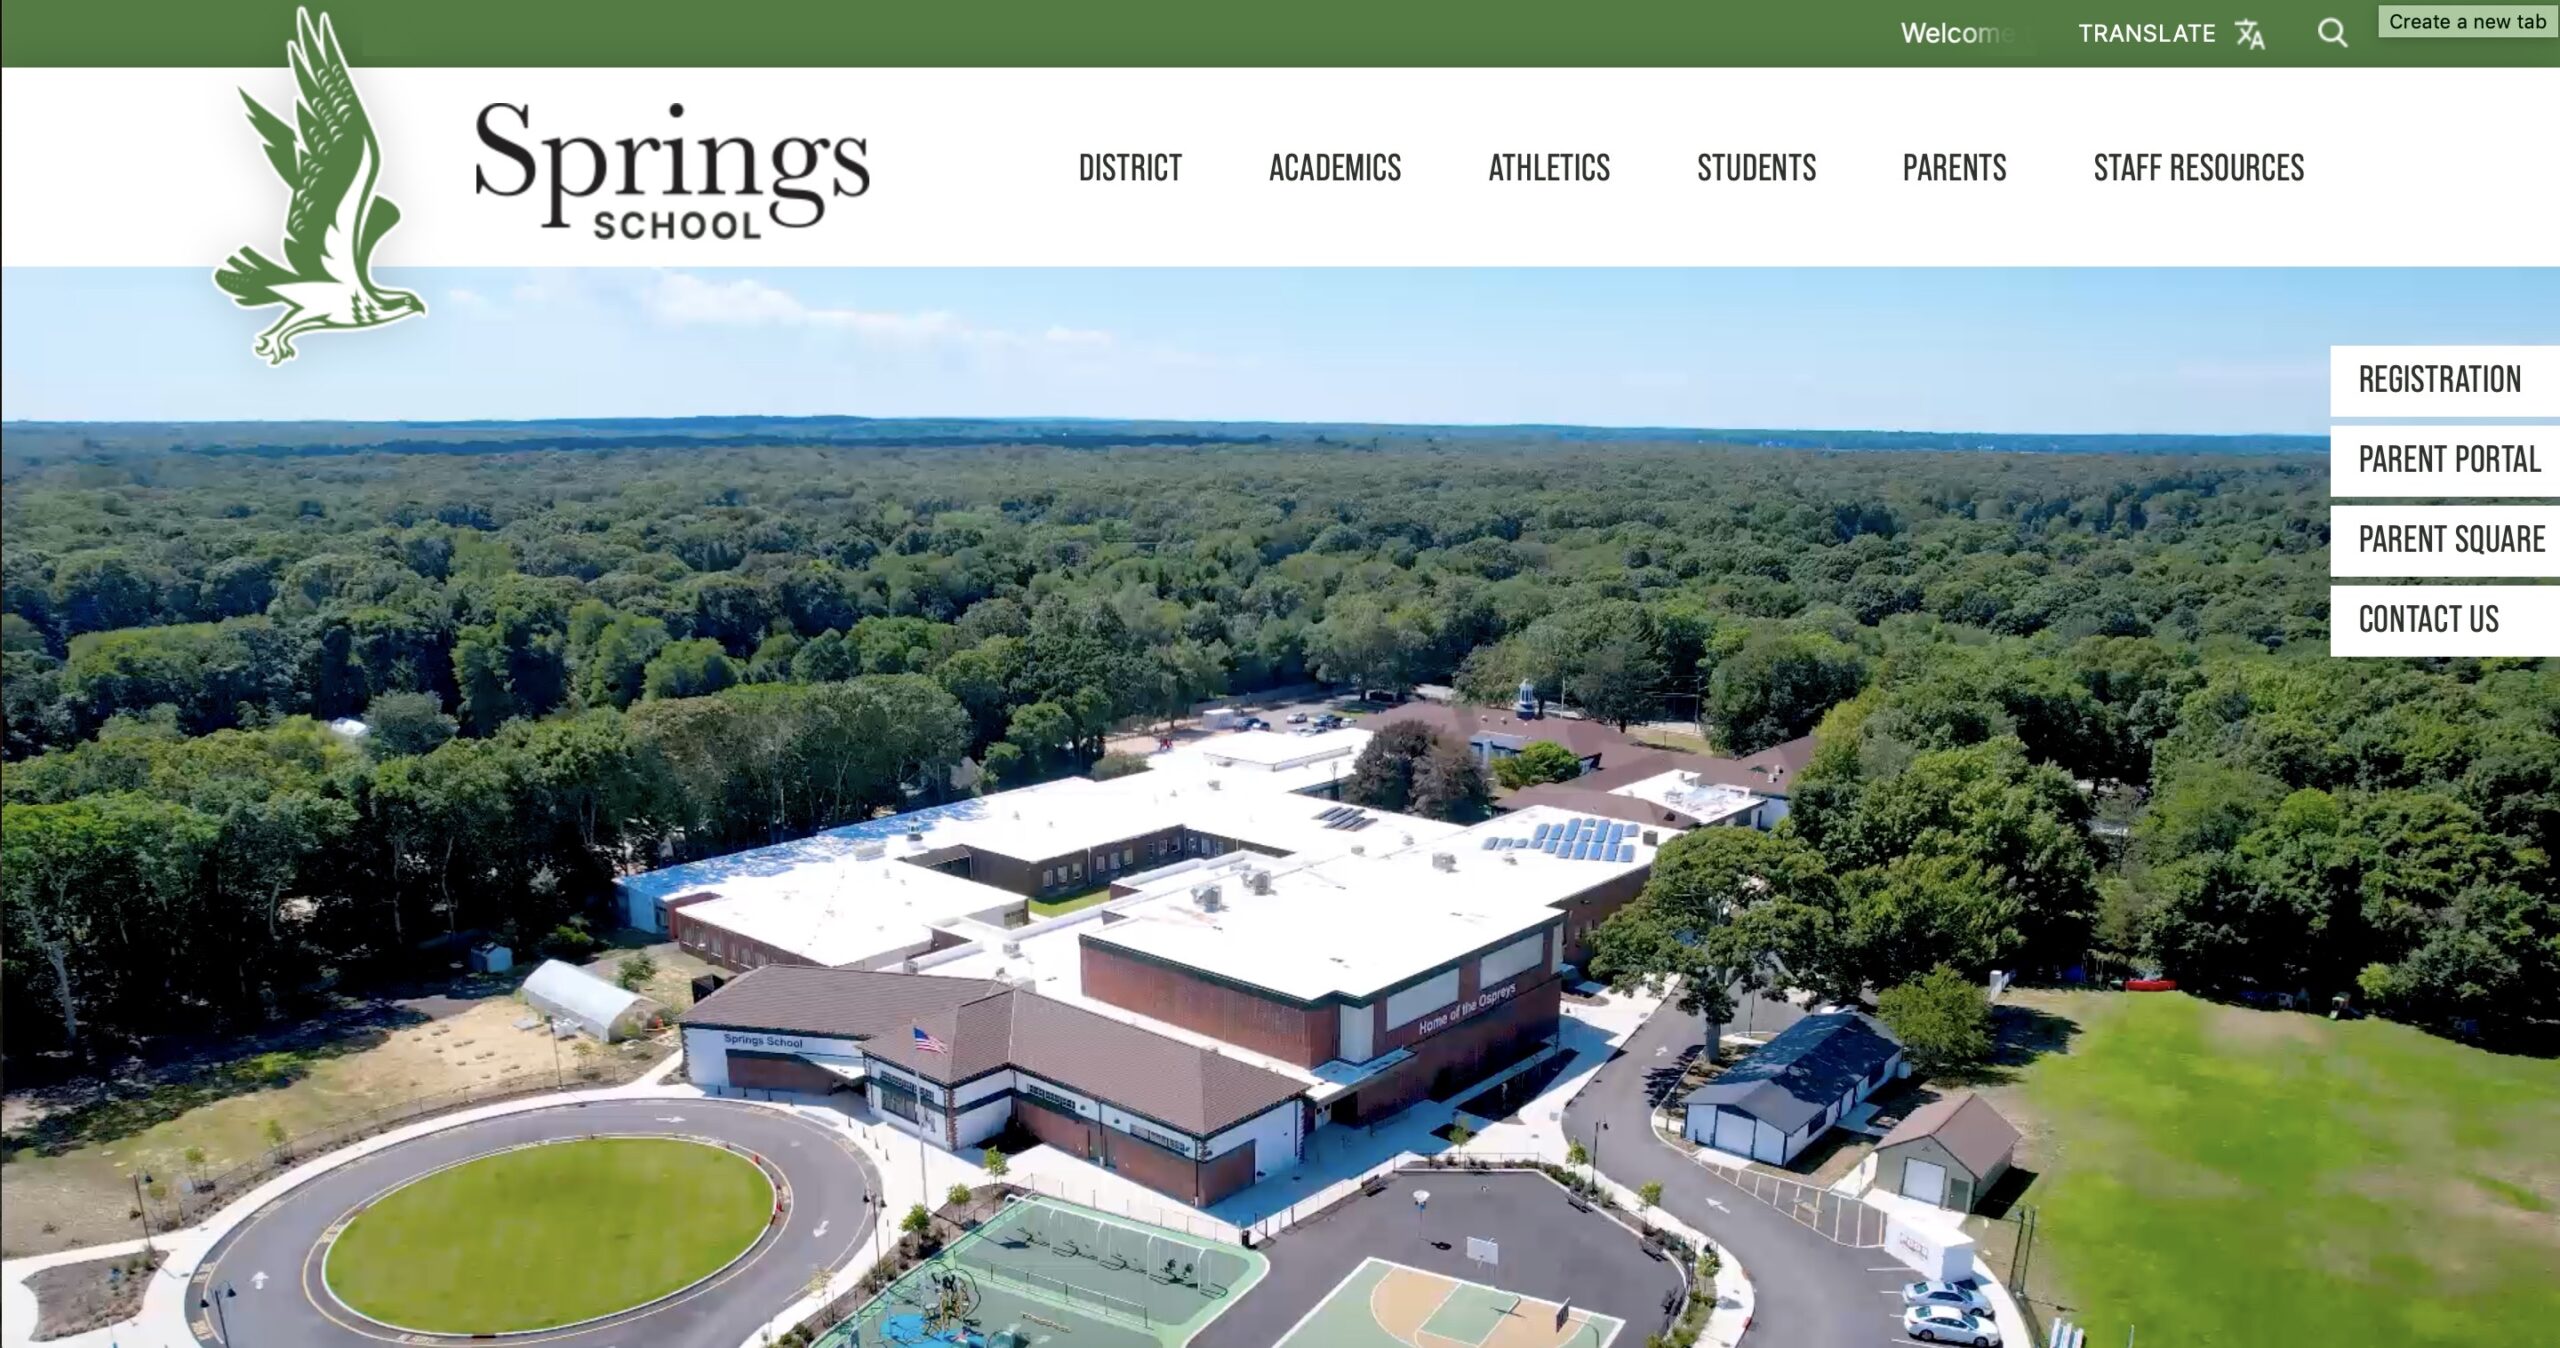 Springs School's landing page for its updated website.